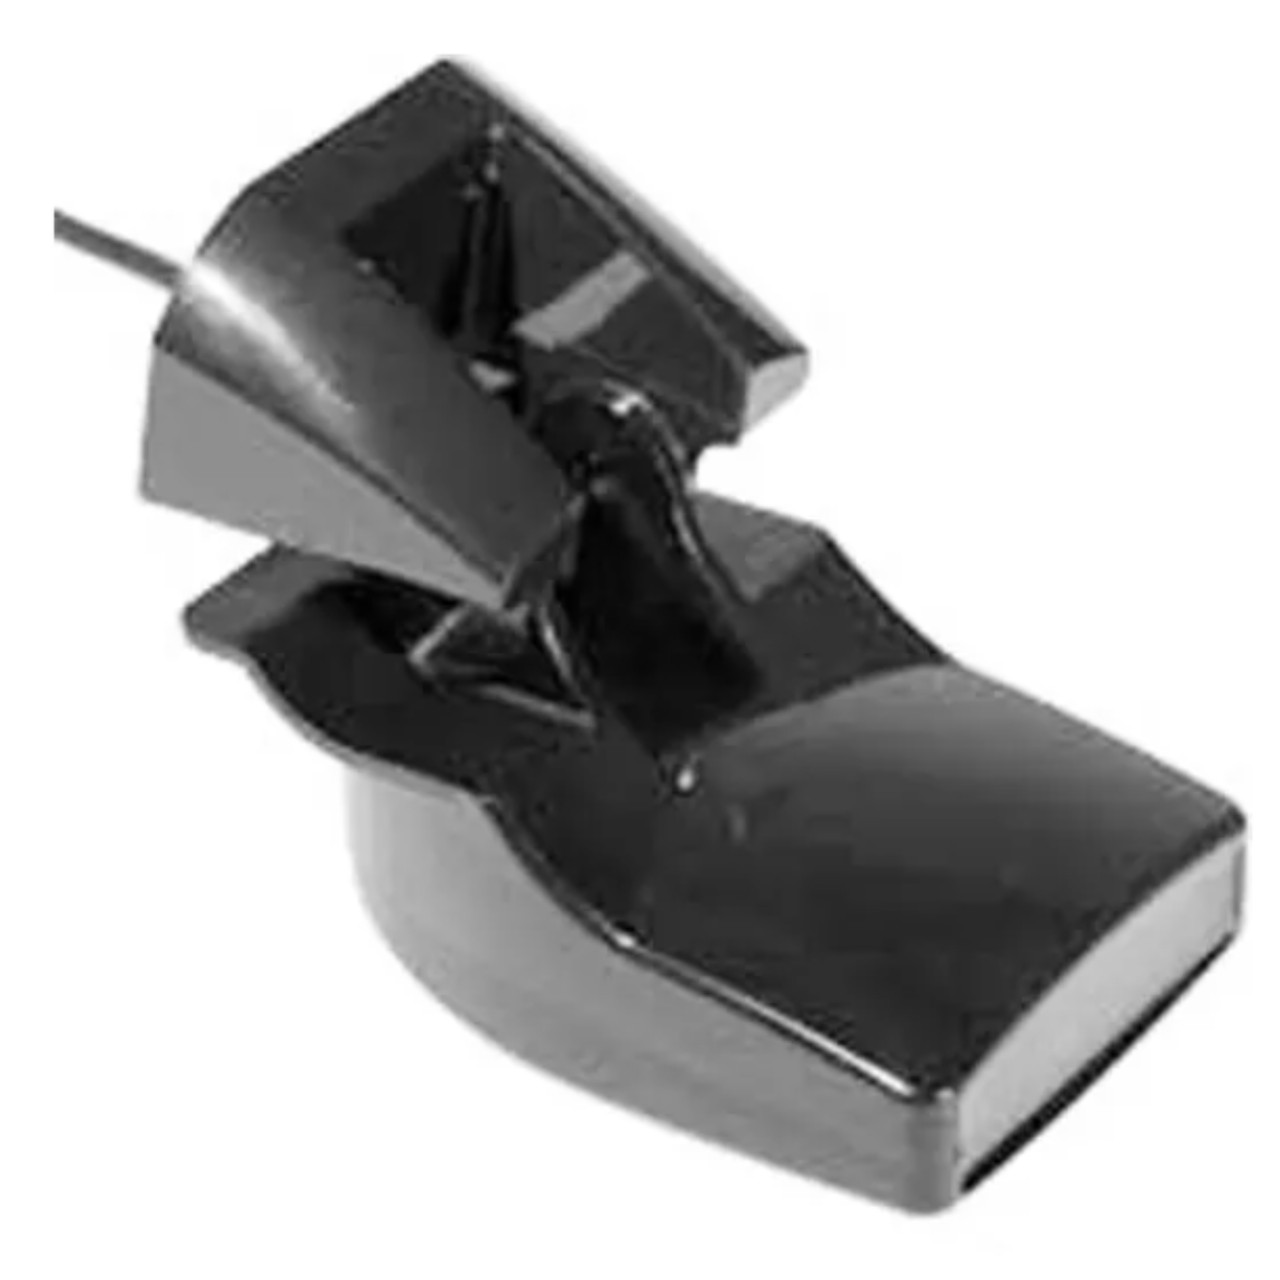 Garmin New OEM Plastic Transom Mount Transducer with Depth & Temperature (Dual Frequency, 6-pin), 010-10272-00